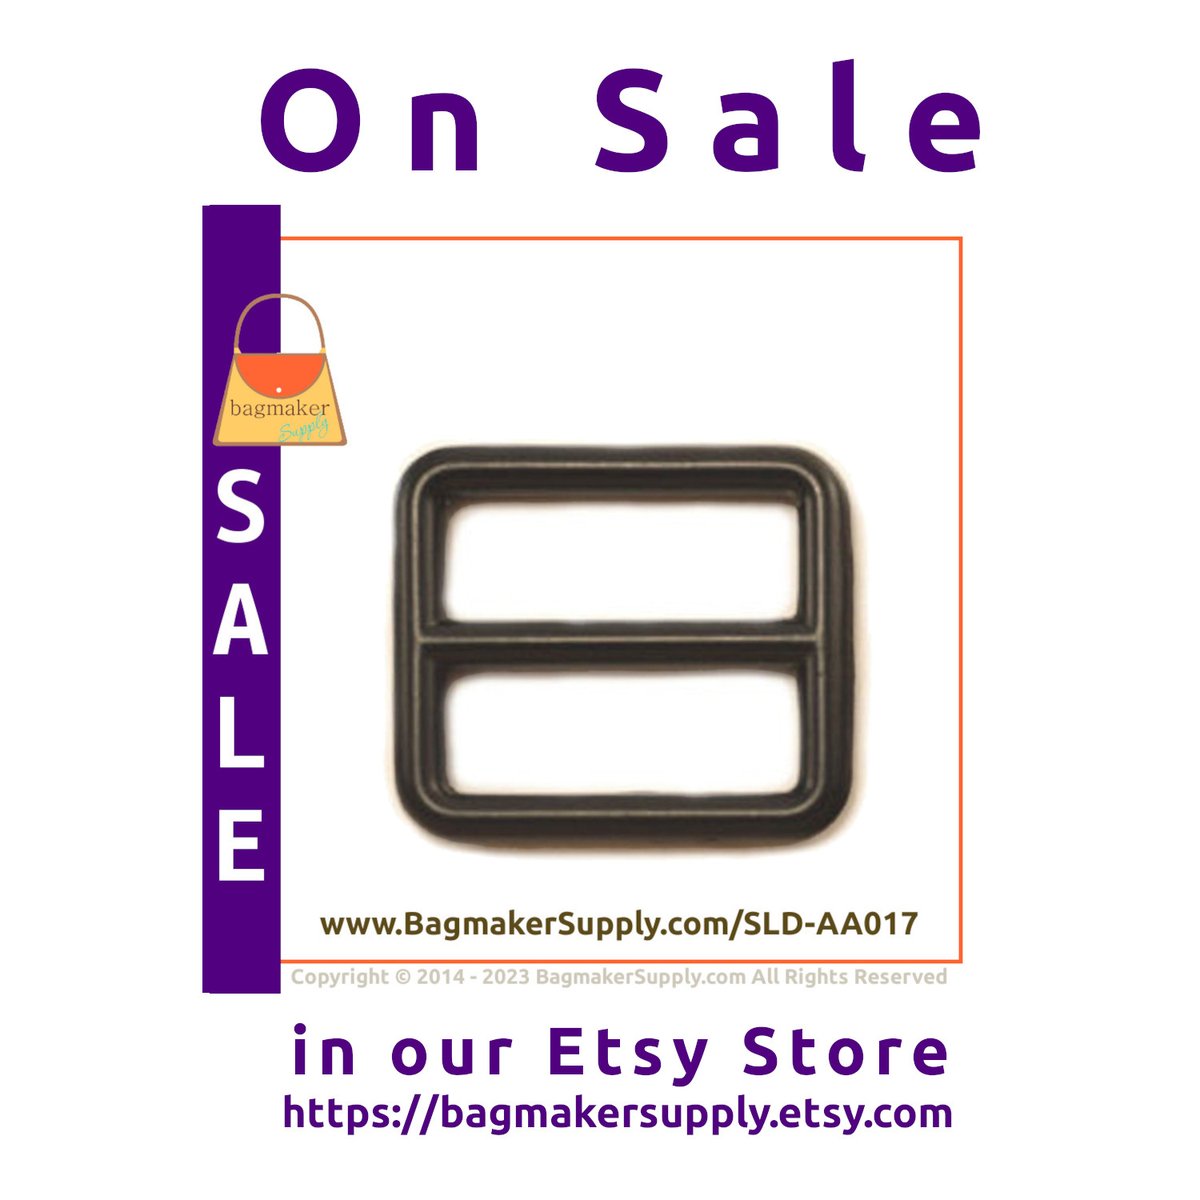 Sale ends November 27 2023 on this 1 Inch Cast Triglide Center Bar Slide with a Black Finish in our Etsy Store BagmakerSupply.etsy.com/listing/213842…

BagmakerSupply.com/SLD-AA017

#BagmakerSupplySale
#BagmakerSupply
#BagmakingSupplies
#Crafts
#Sewing
#SewingSupplies
#SewingAddict
#EtsySeller